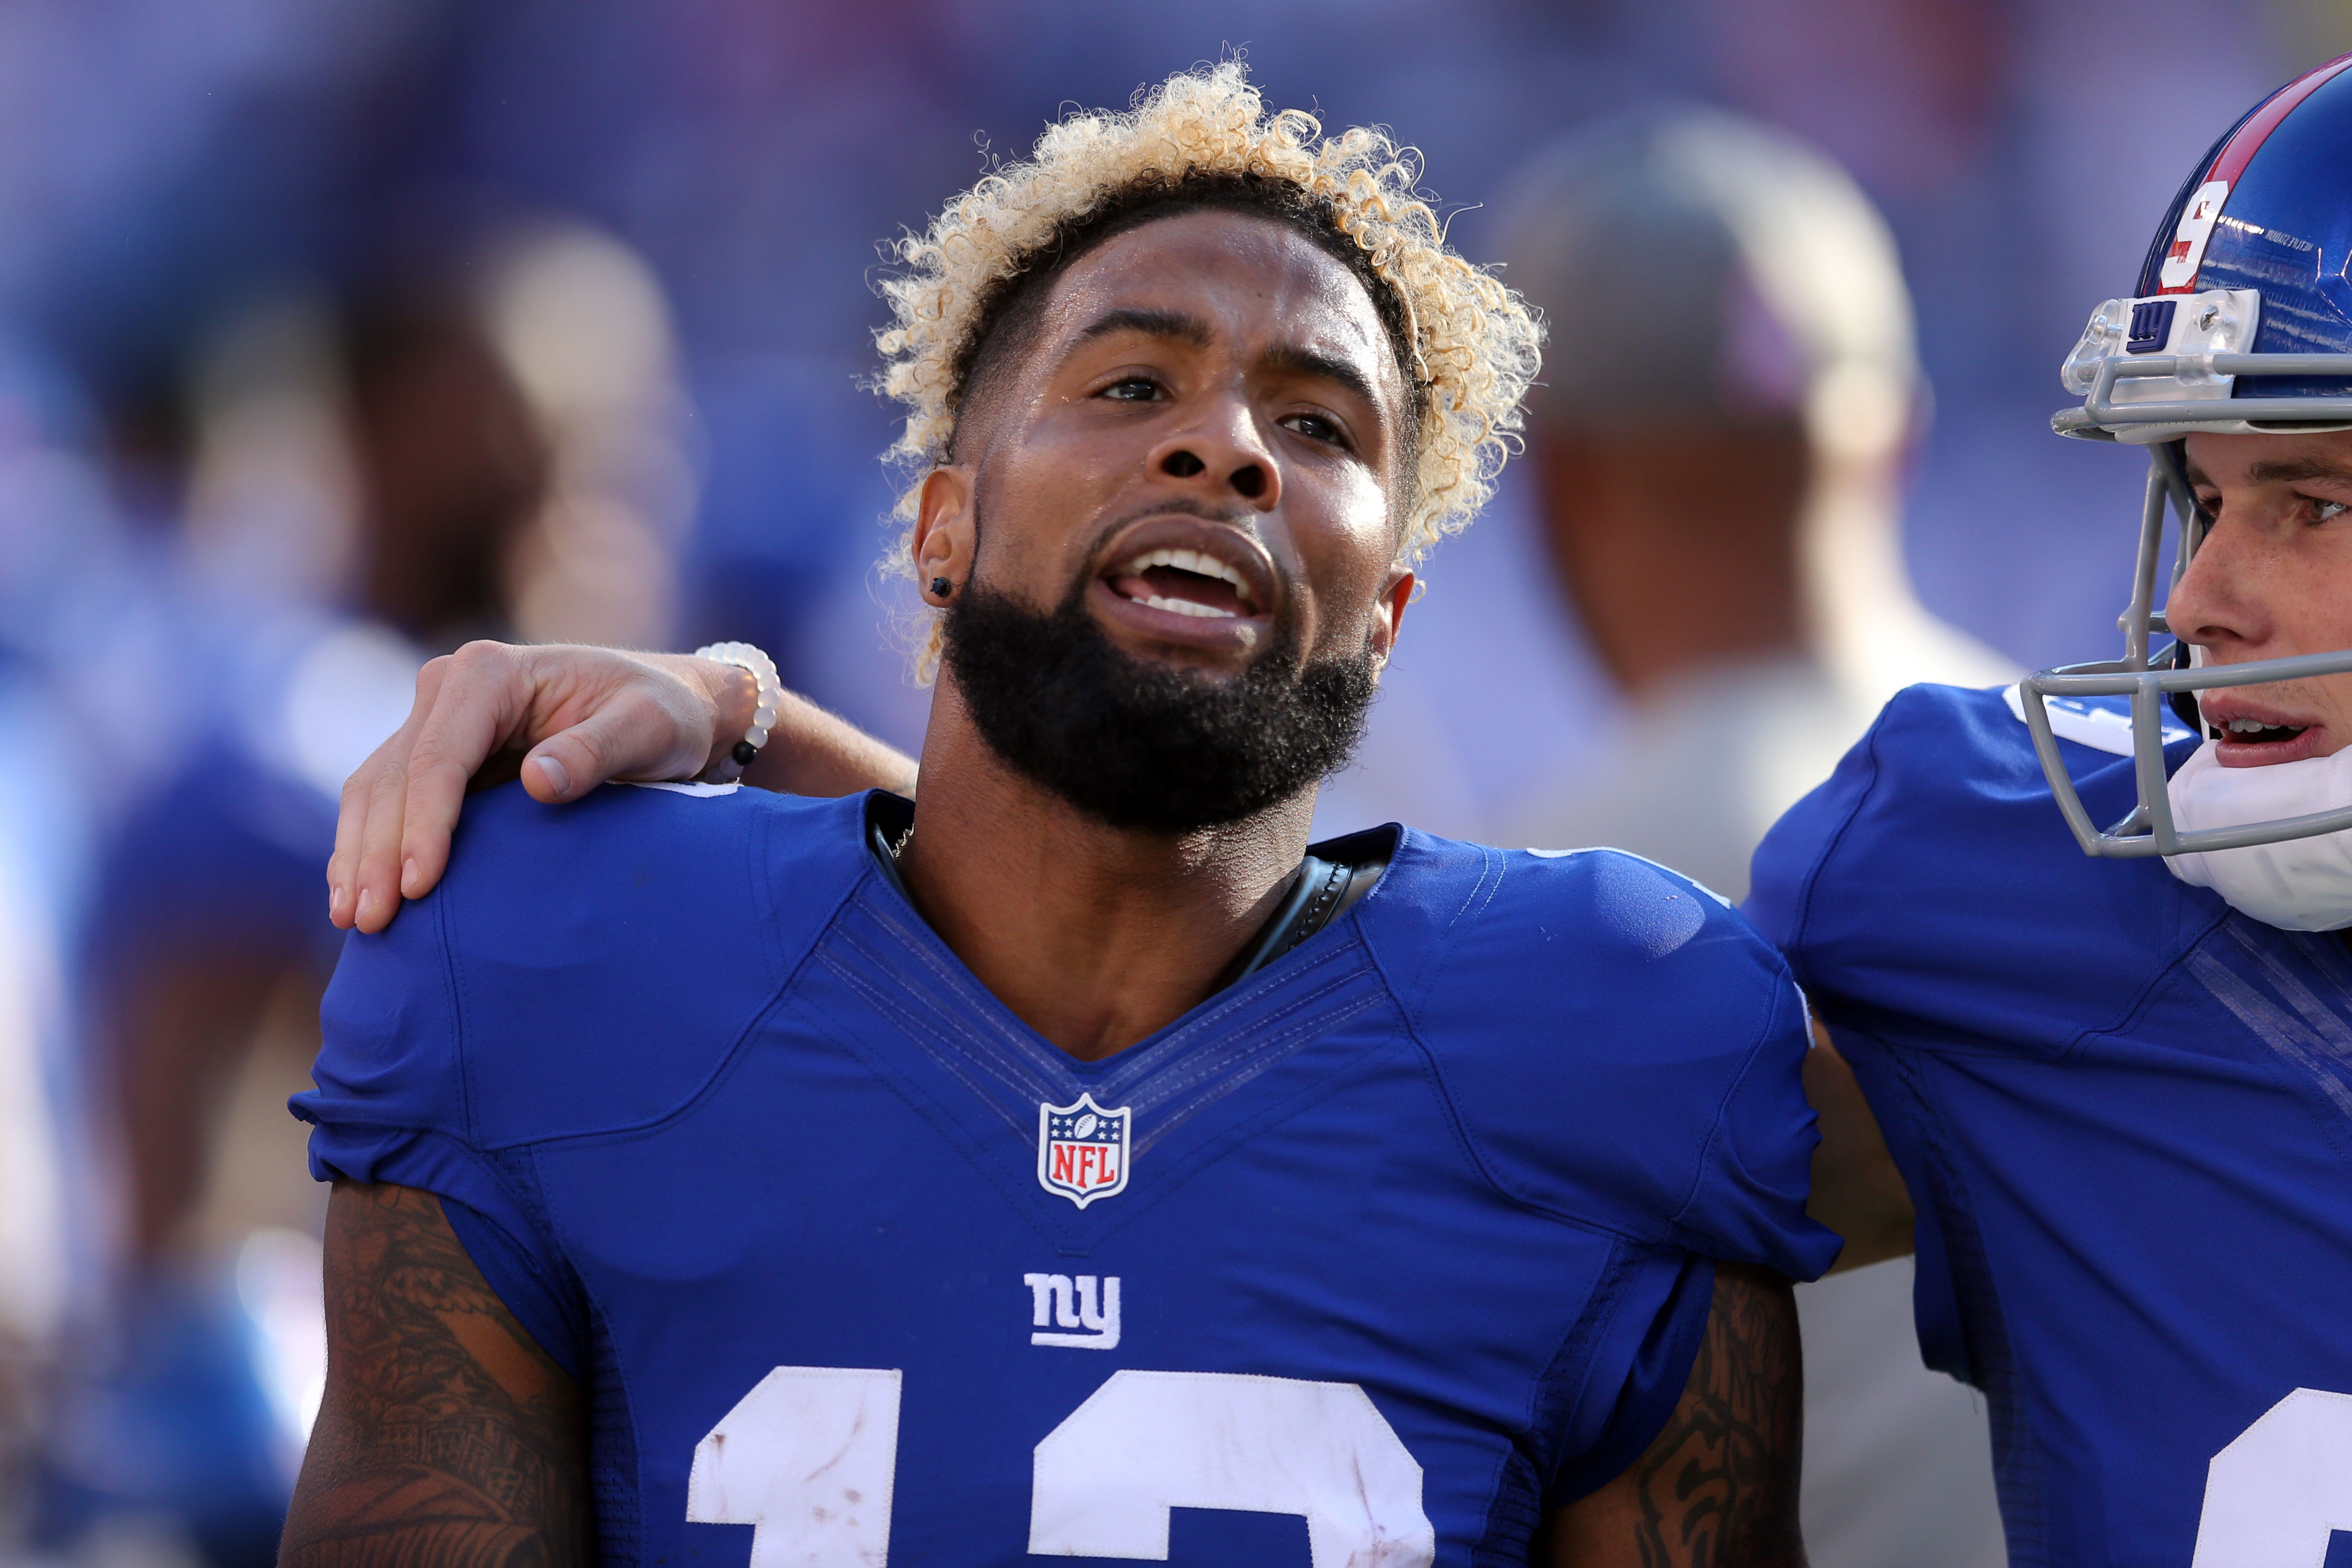 Panini America Unveils Limited Time Trading Card To Commemorate Odell Beckham Jr. 3